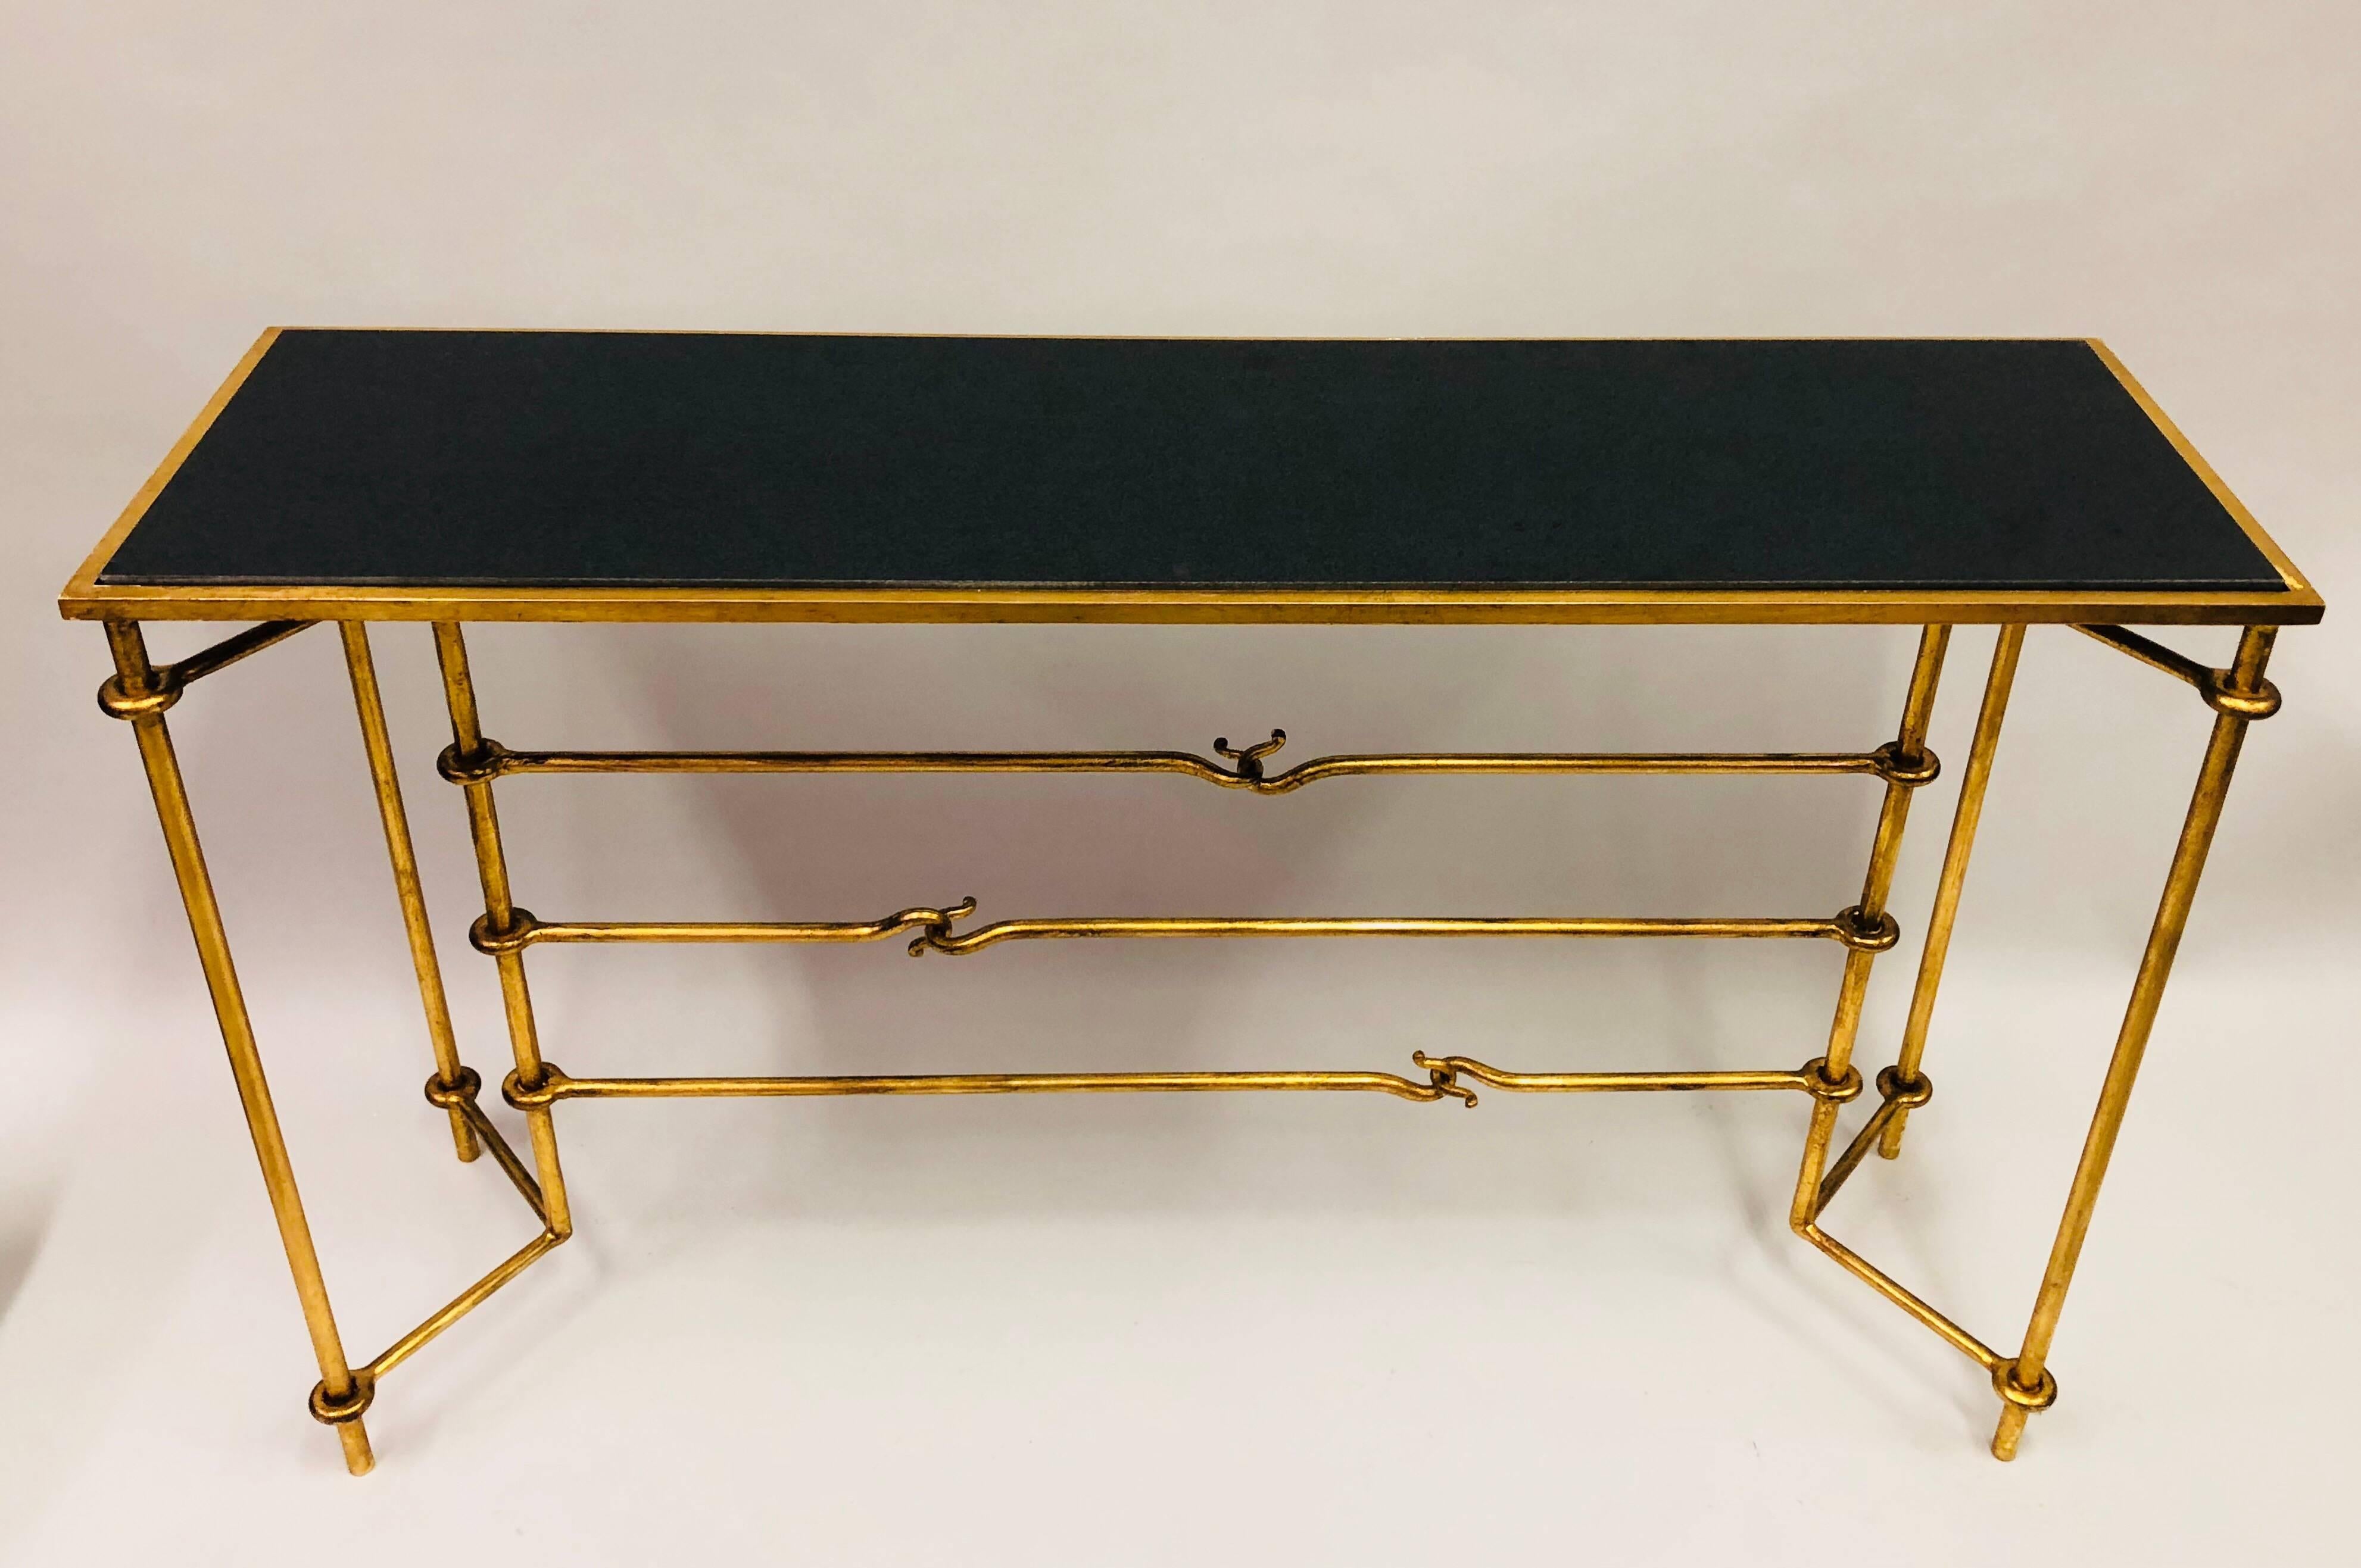 Italian midcentury, handwrought and hand-hammered gilt iron console or sofa table by the Florentine sculptor / designer, Giovanni Banci in the modern neoclassical spirit.

The table has bold lines with the gilt iron frame simulating a Classic